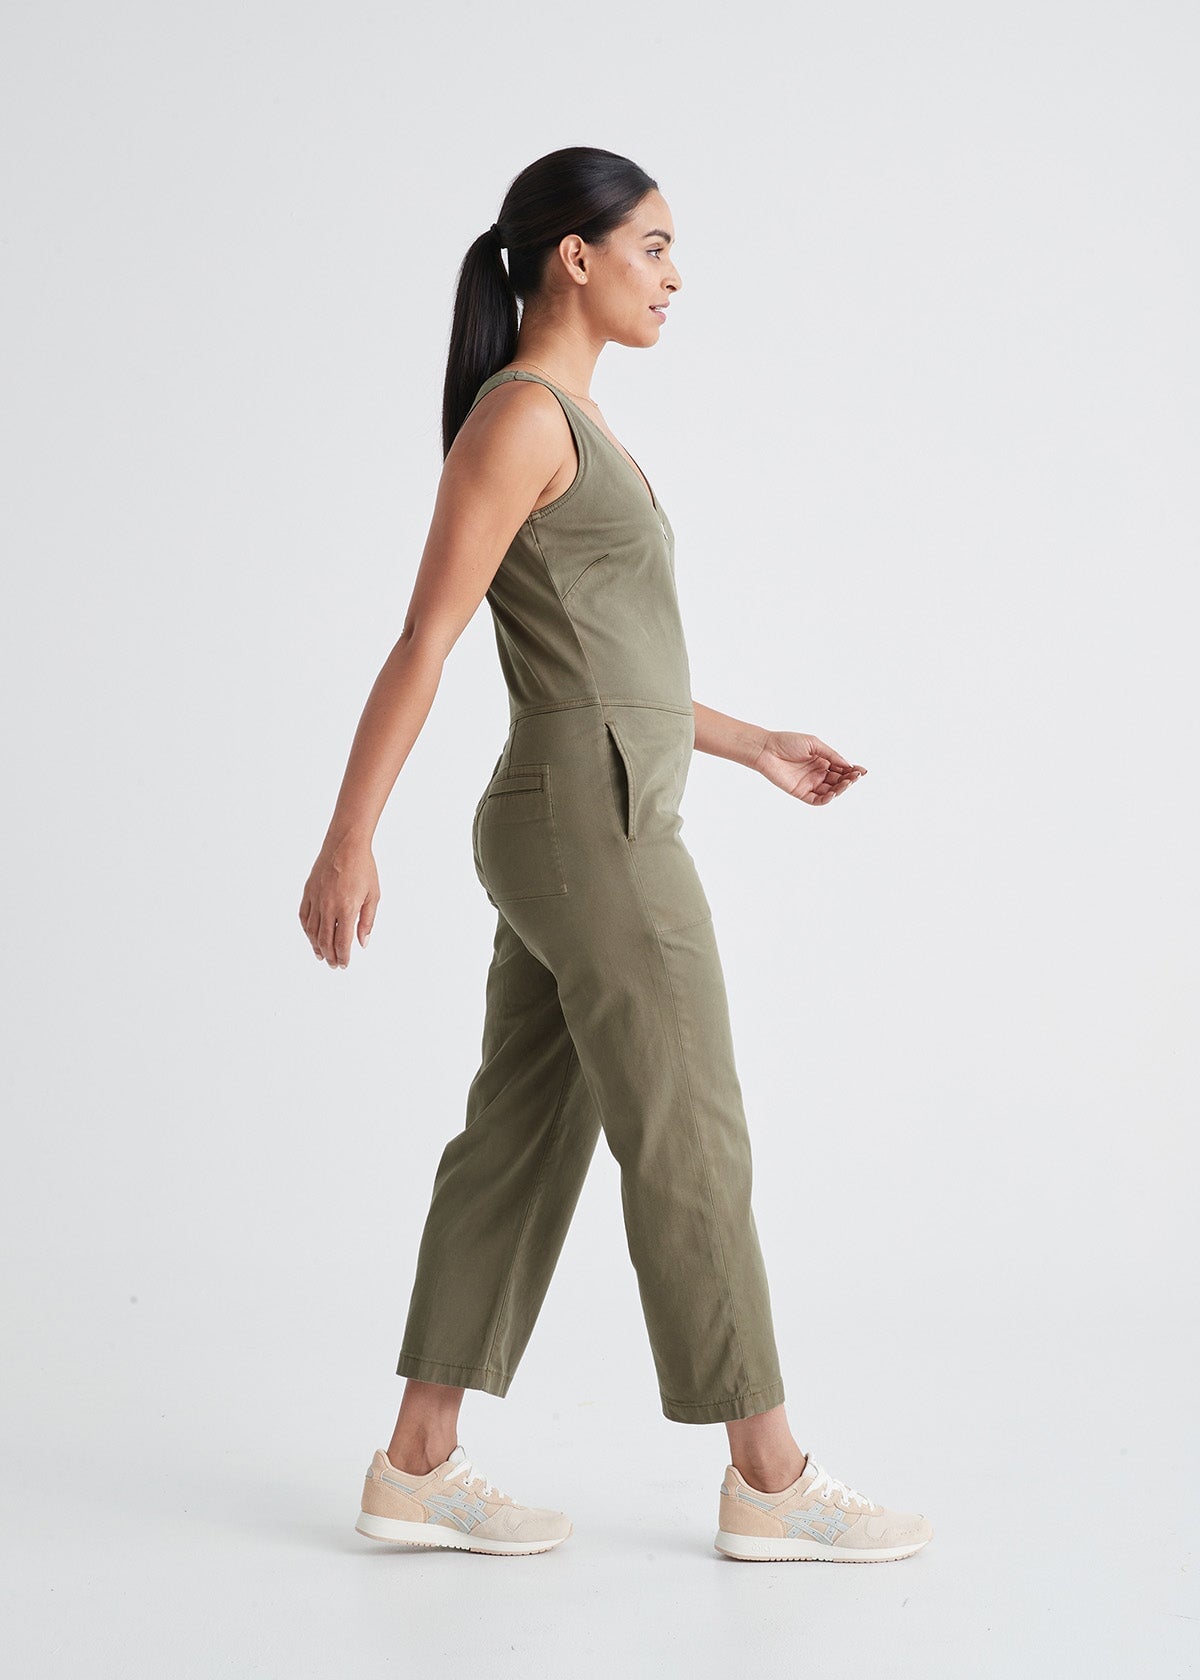 Glossy Green Bodysuit Wet Look Stretchy Jumpsuit Women Playsuit